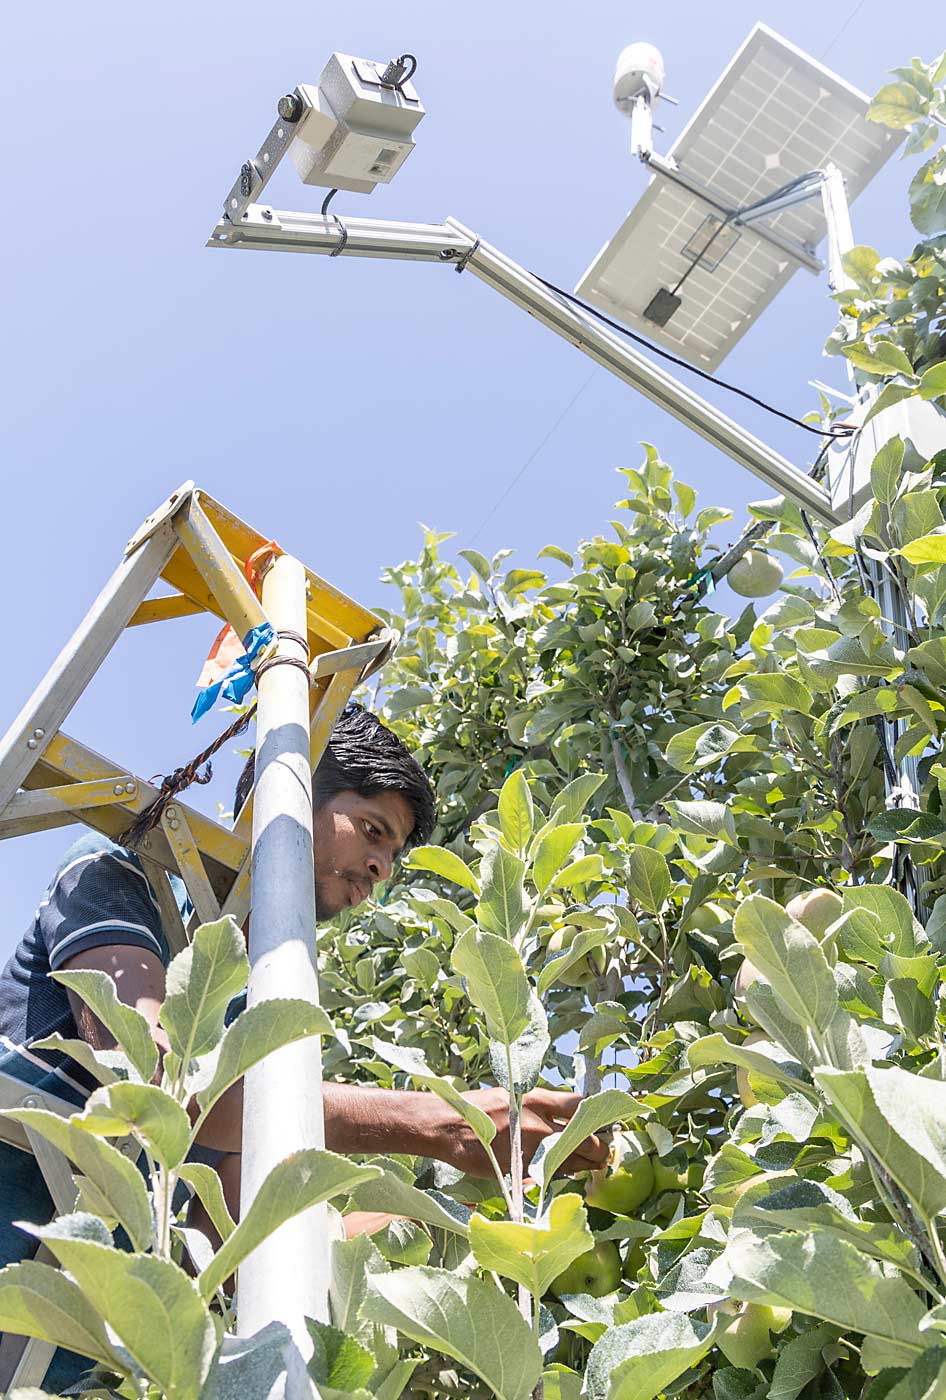 Washington State University graduate student Basavaraj Amogi measures fruit growth in a Prosser, Washington, orchard outfitted with fruit surface temperature sensors and in-canopy weather sensors that could be used to trigger cooling systems before risk thresholds are exceeded. (Kate Prengaman/Good Fruit Grower)